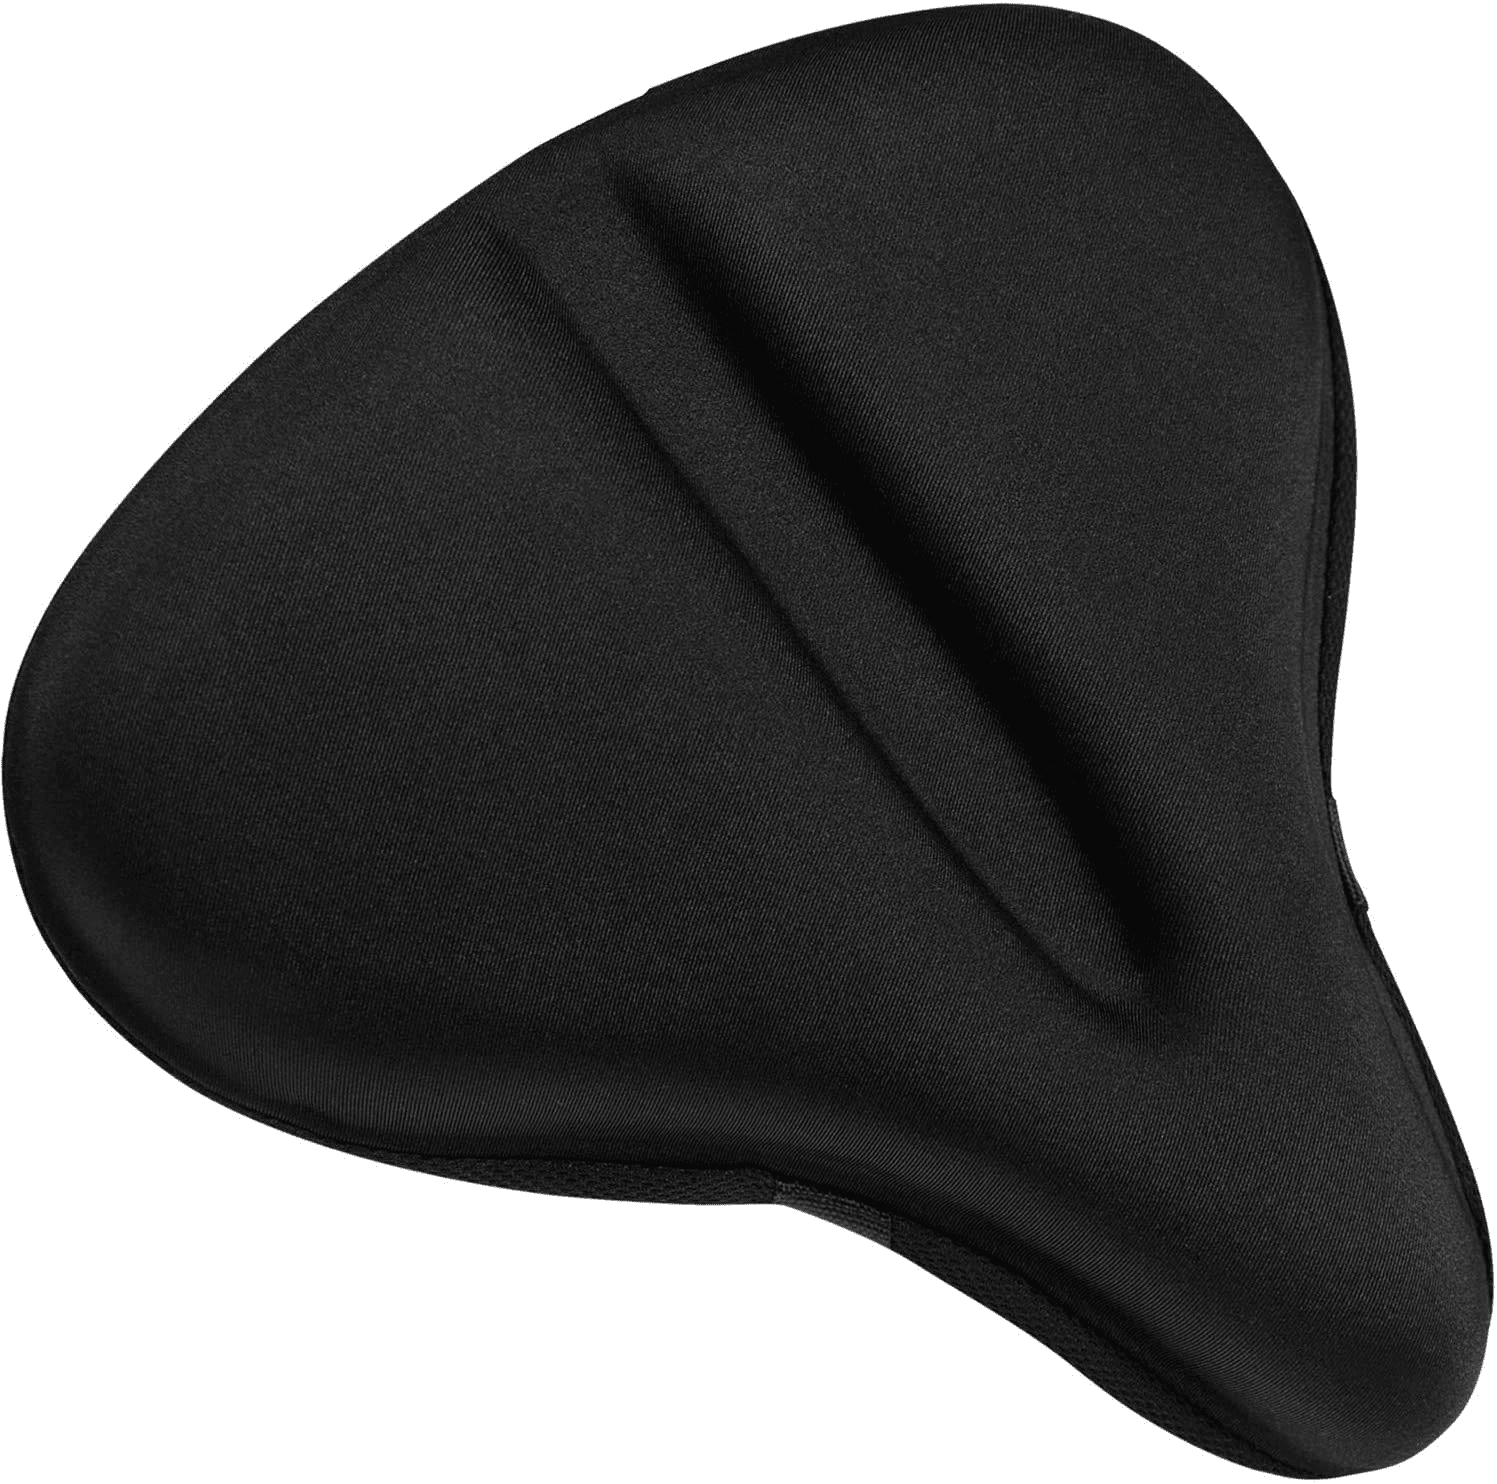 Large Exercise Comfortable Bike Seat 11x10 inches Wide Gel Pad Cushion Cover 